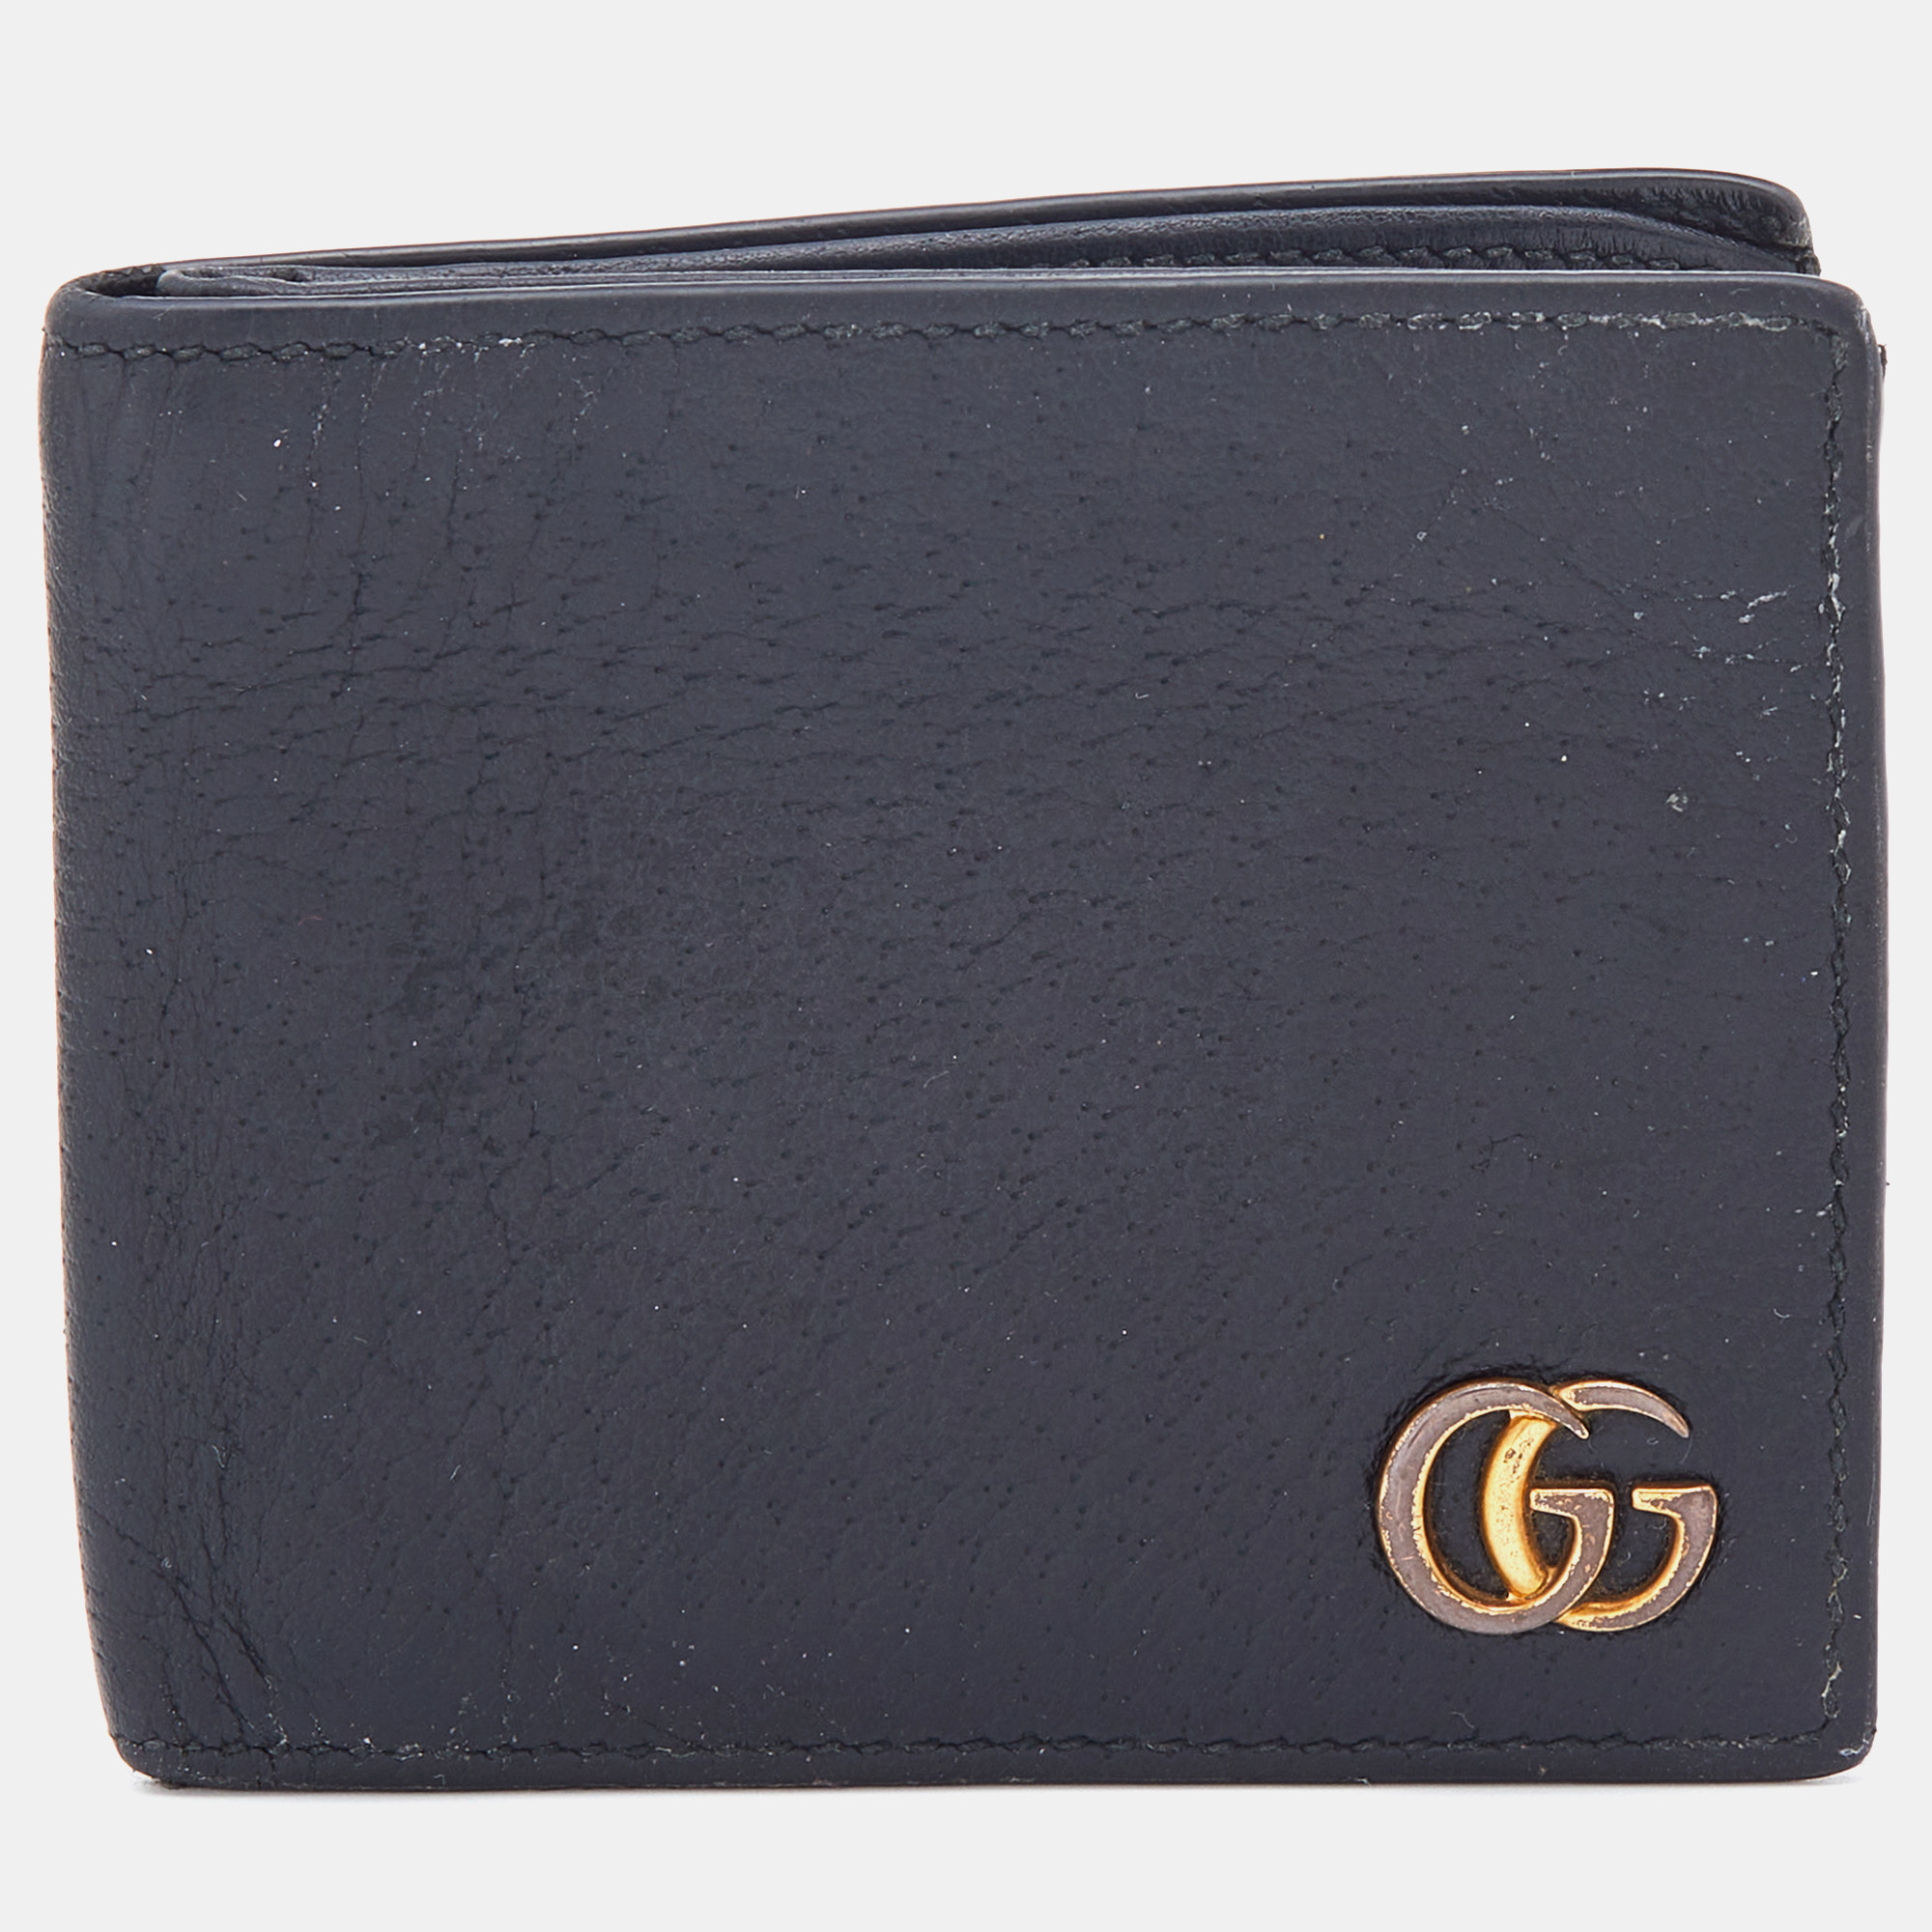 Pre-owned Gucci Black Leather Gg Marmont Bifold Wallet